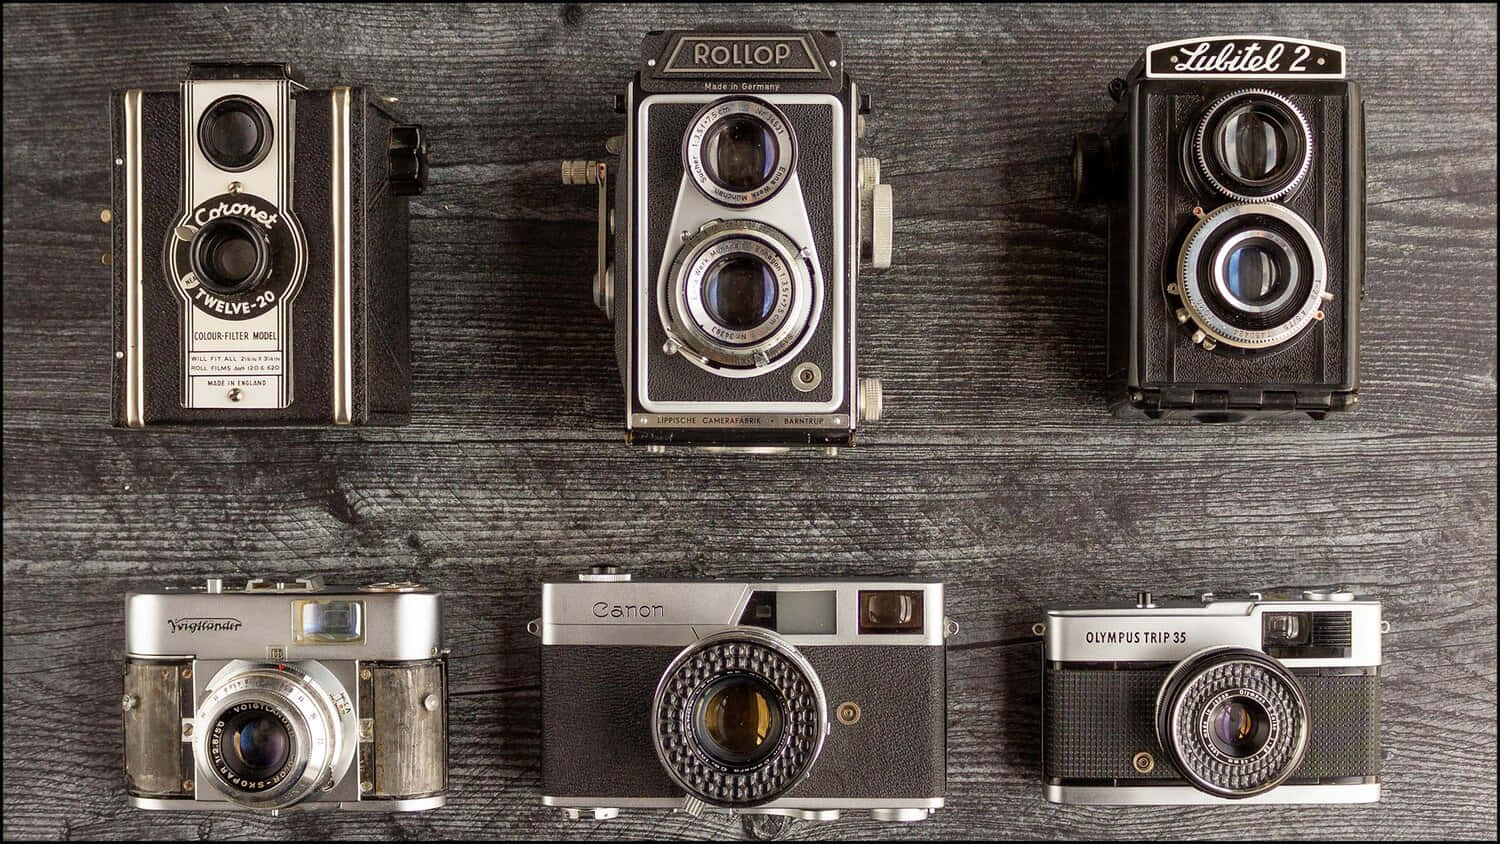 A Group Of Vintage Cameras On A Wooden Surface